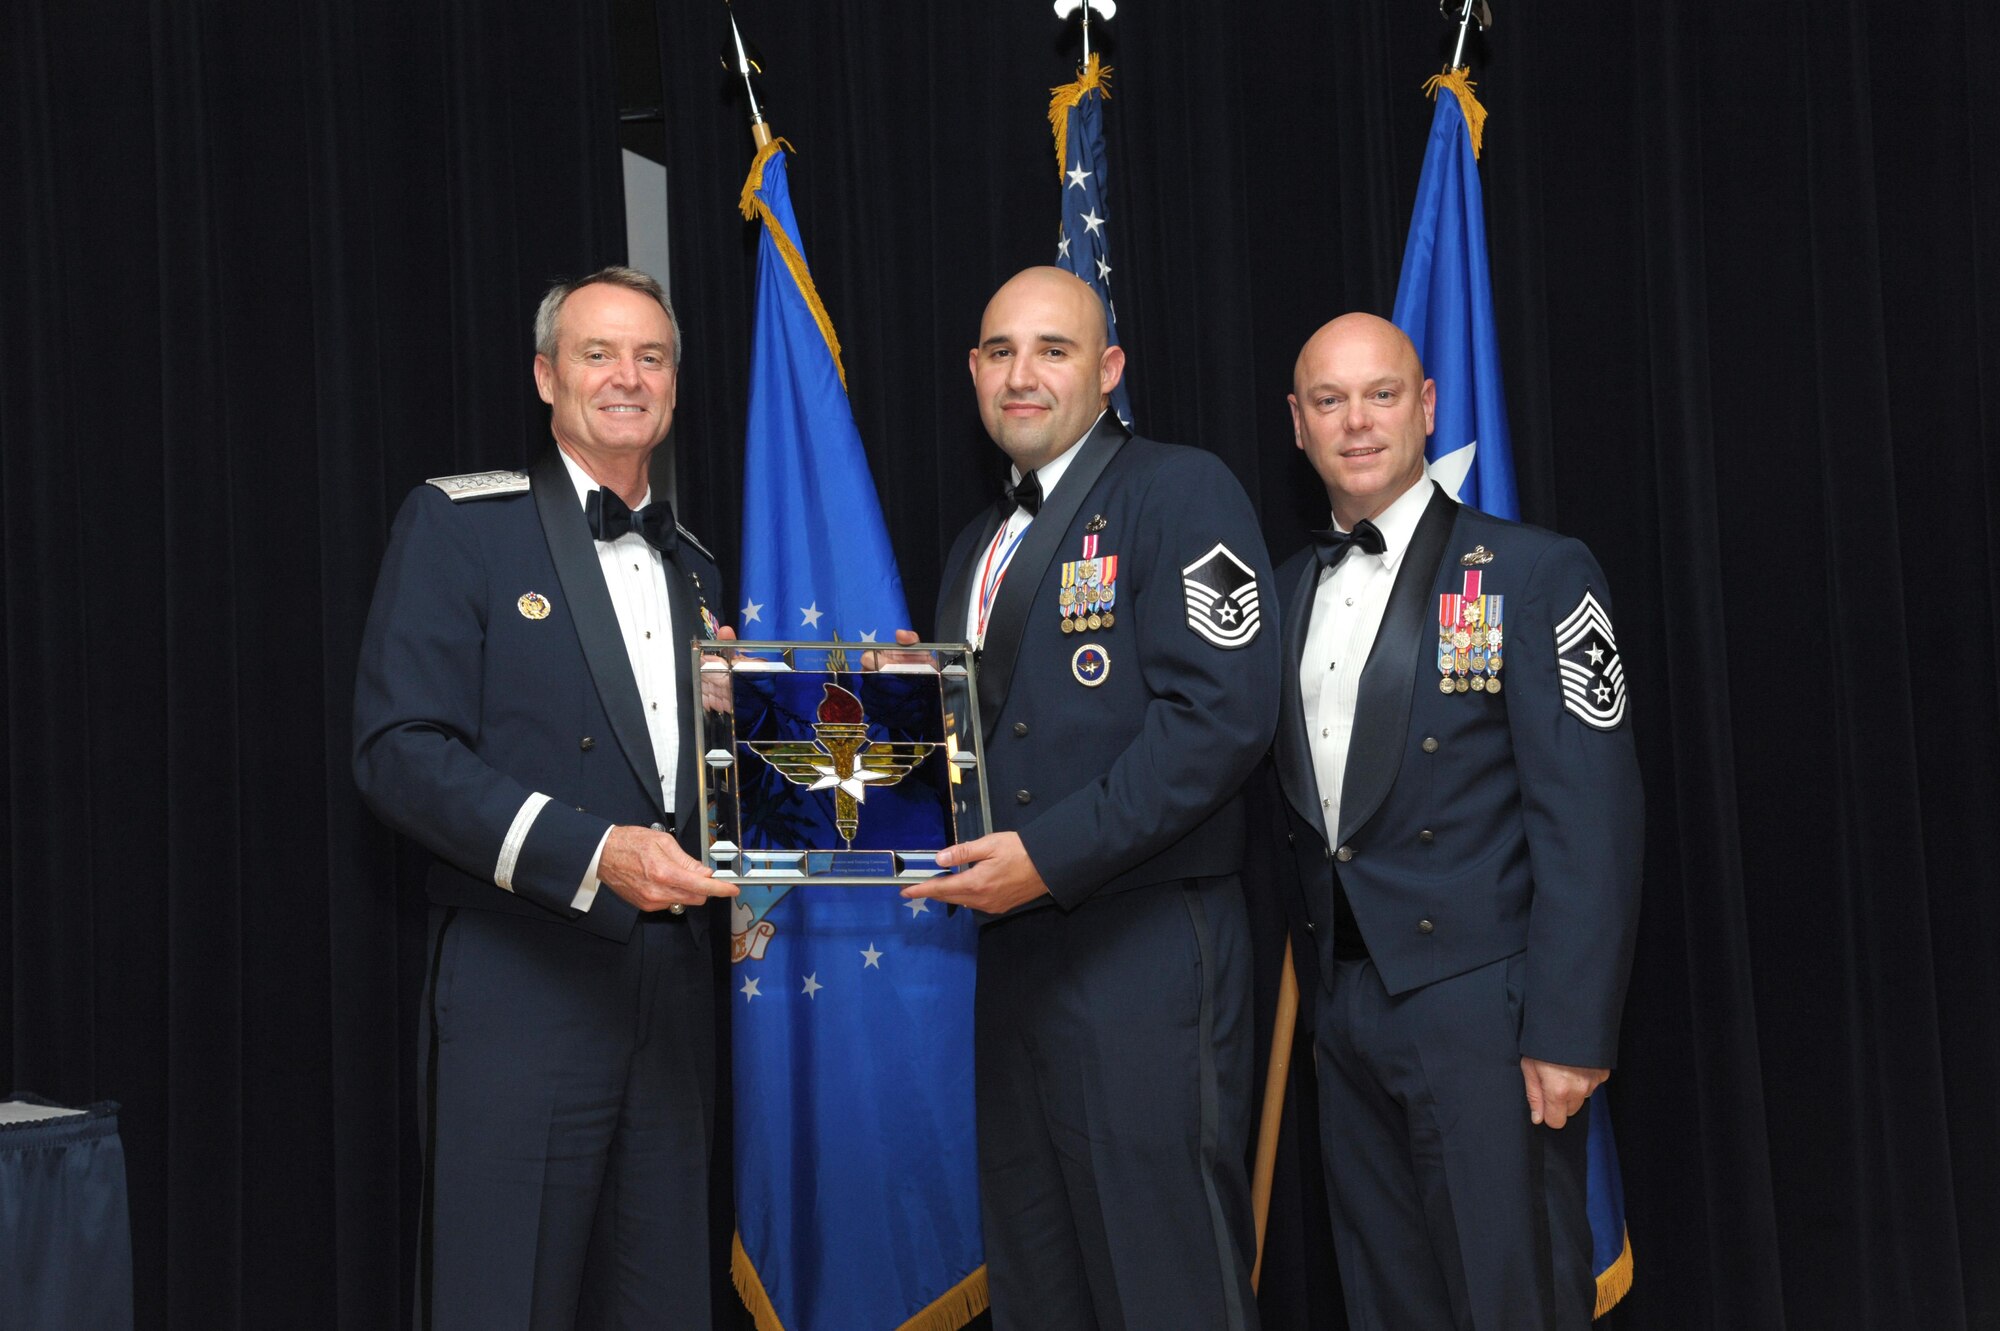 Master Sgt. Raul Hernandez Jr., 326th Training Squadron, Joint Base San Antonio-Lackland, Texas, receives an award from Lt. Gen. Darryl Roberson, commander, Air Education and Training Command and AETC Command Chief Master Sgt. David Staton during a ceremony here, June 16. Hernandez was selected as the AETC Military Training Instructor of the Year. (U.S. Air Force photo by Joel Martinez)